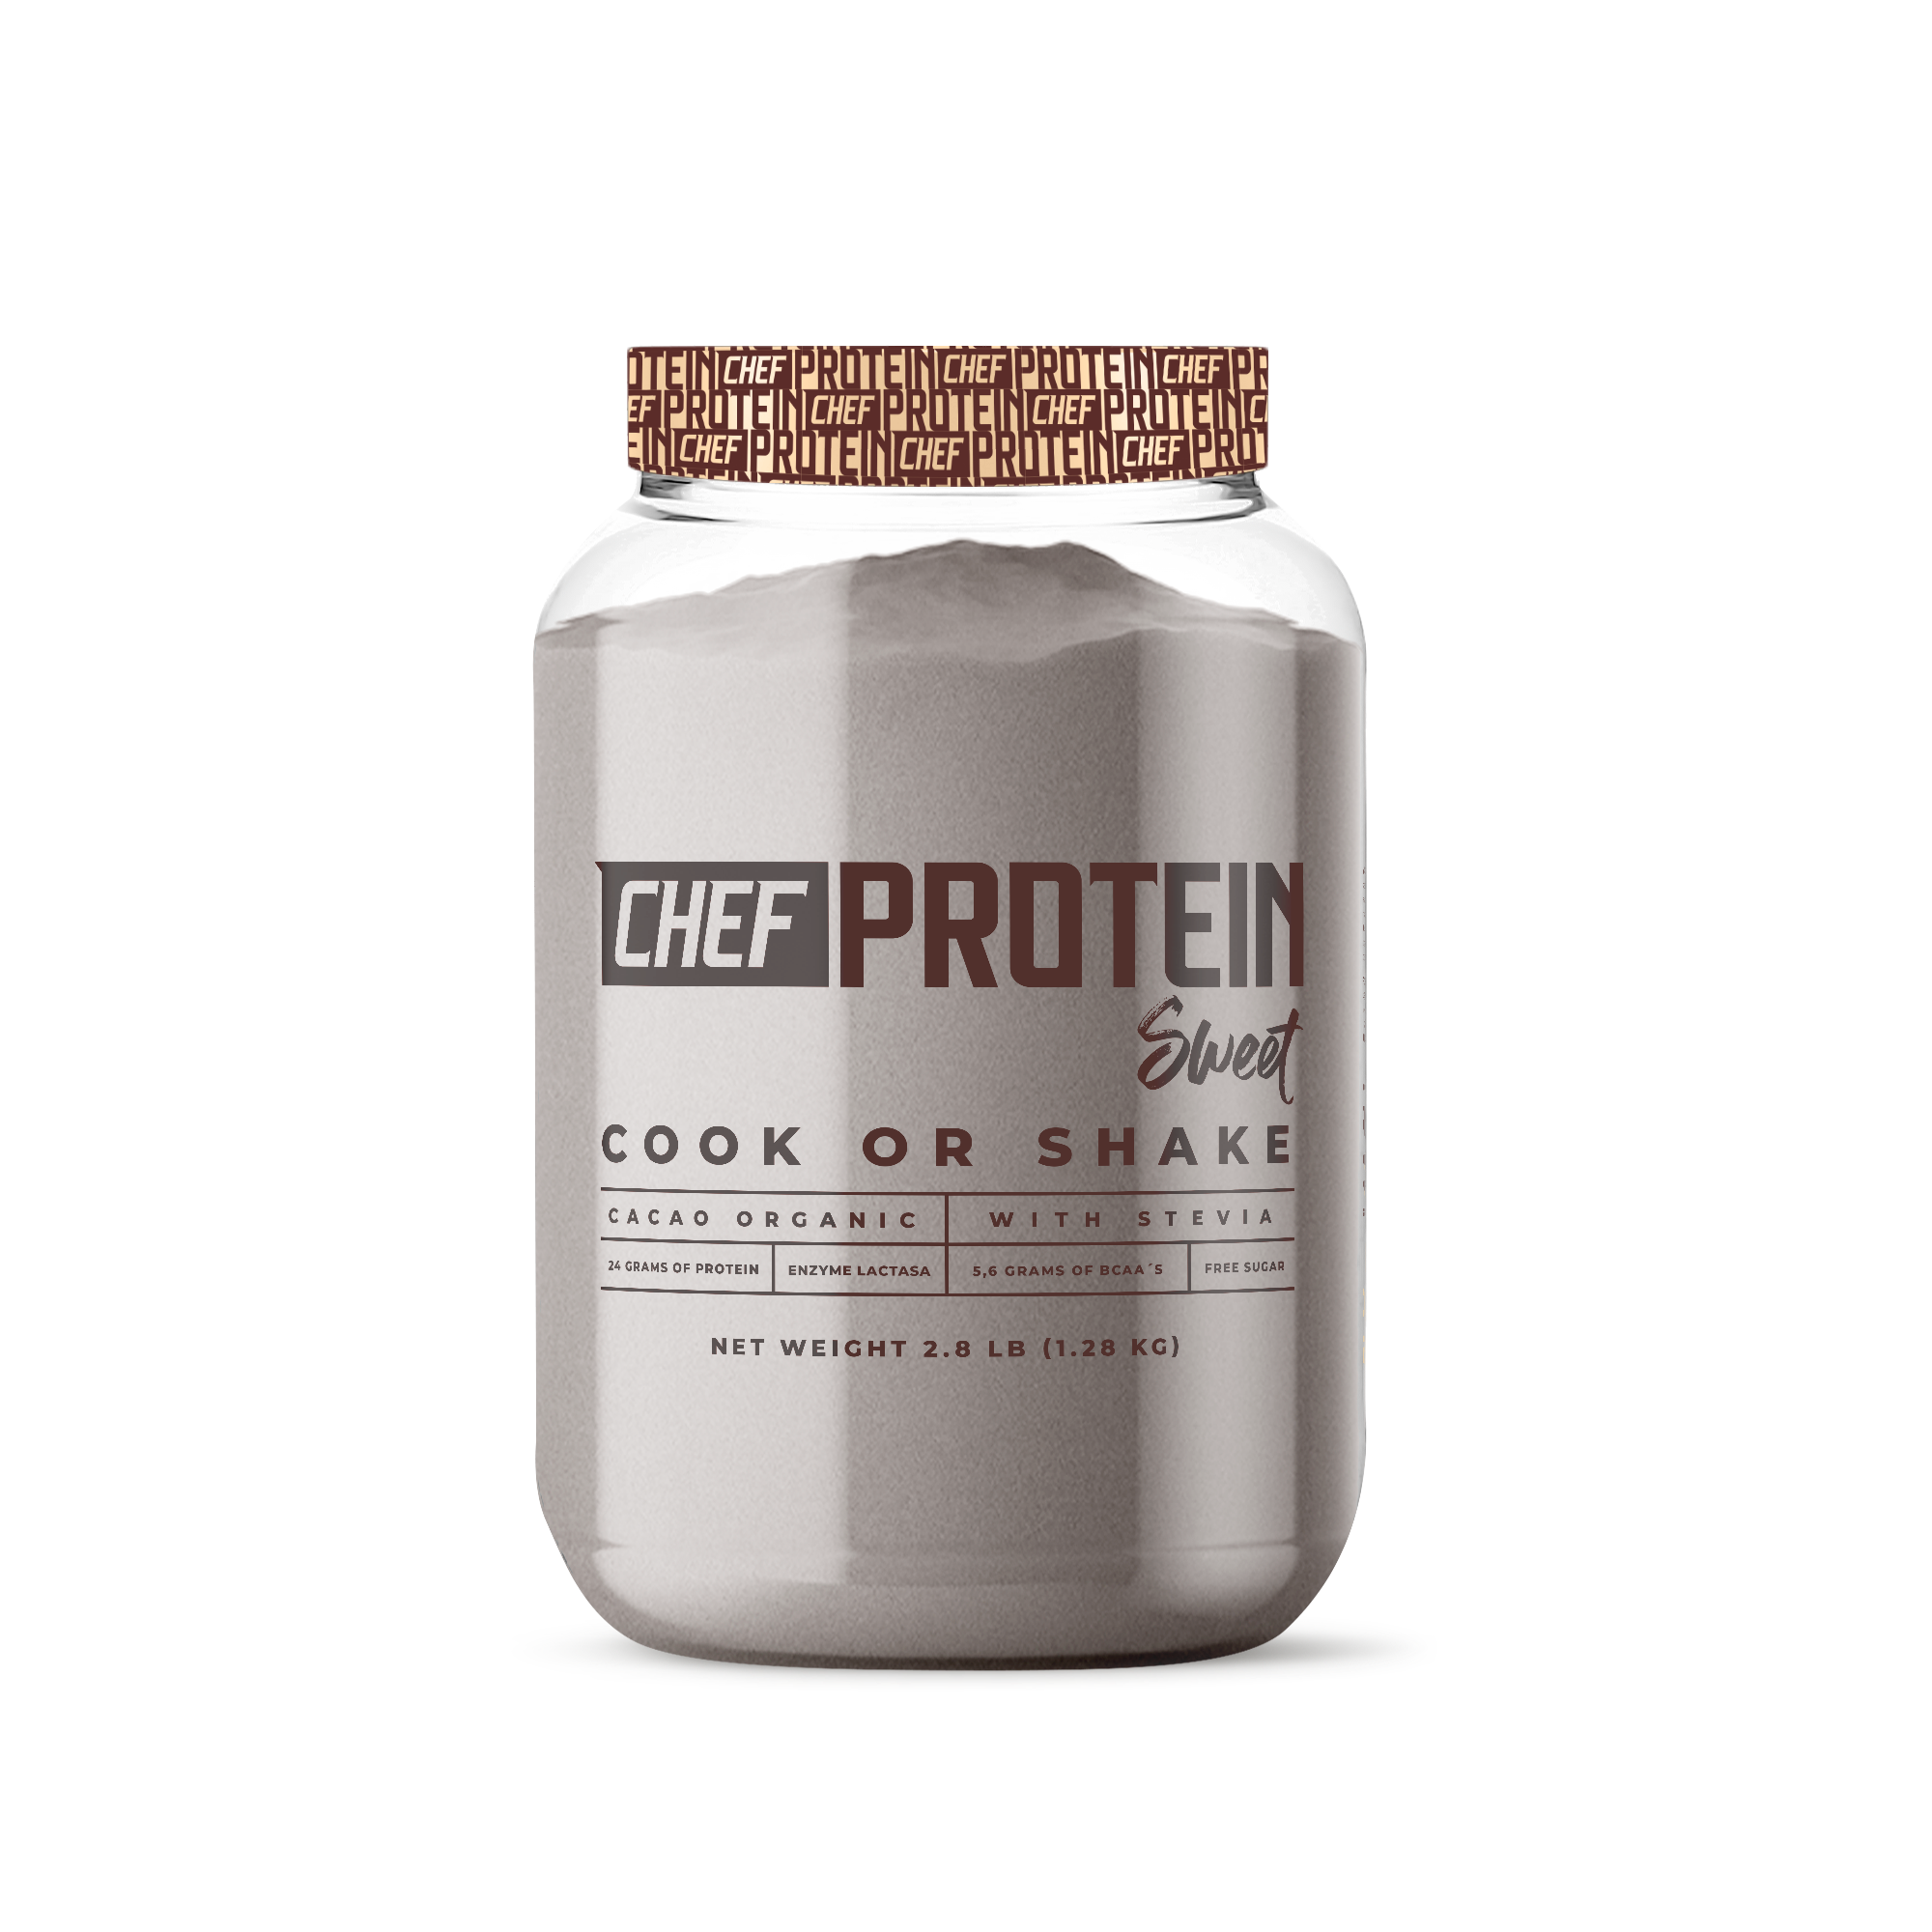 Chef Protein Cacao